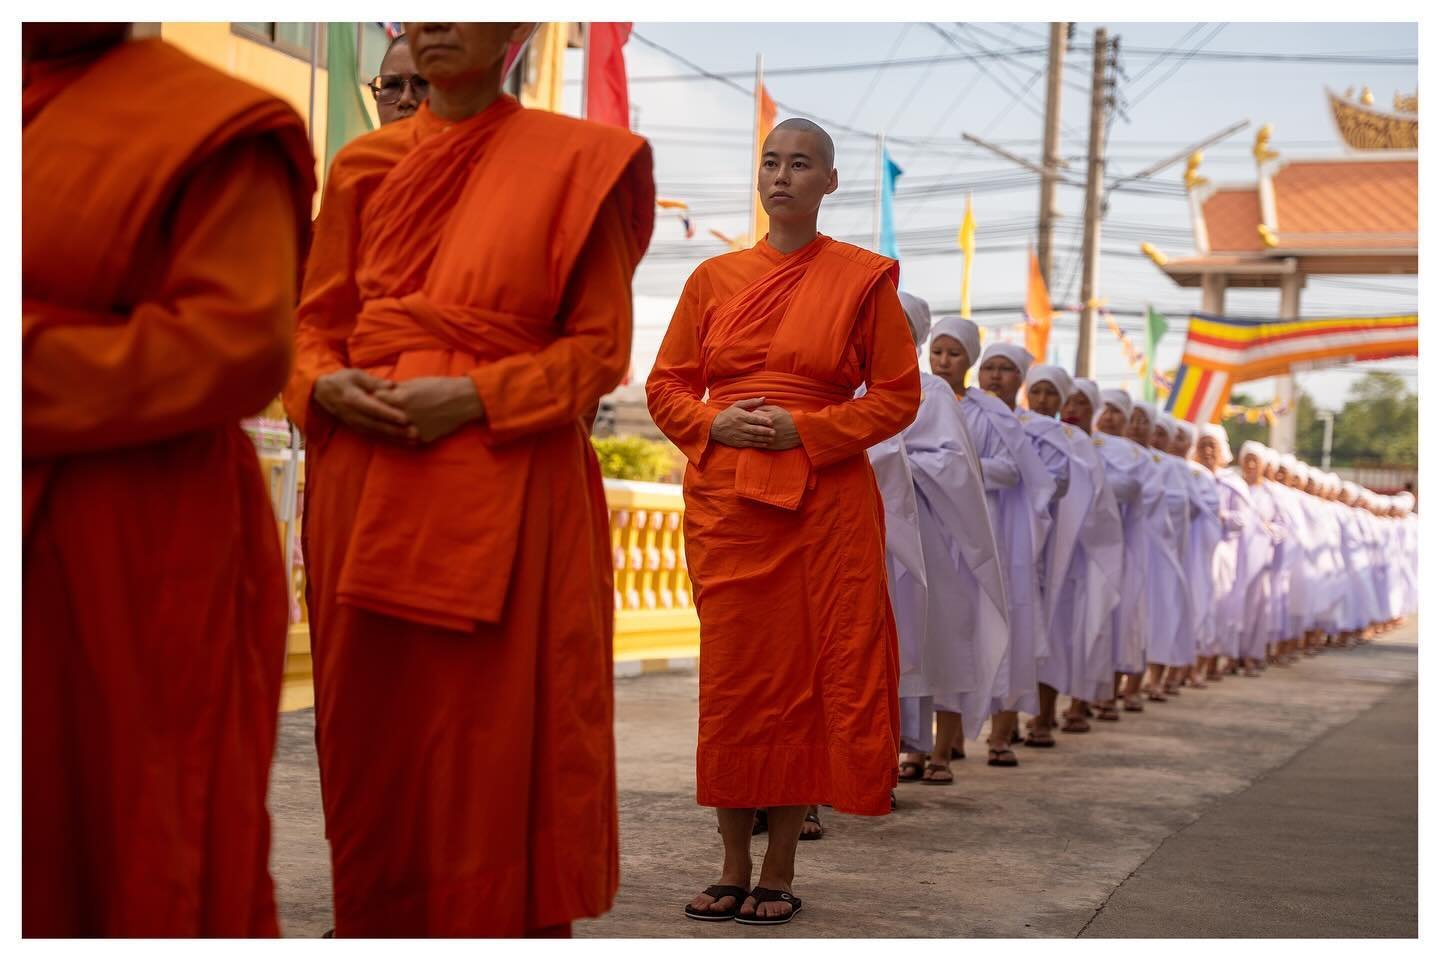 At Songdhammakalyani Monastery, an hour outside Bangkok, 31 women sit in the garden. Dressed in white robes, their hands are folded and sweat is running down their face. It is only eight in the morning but the heat is already oppressive. Family membe